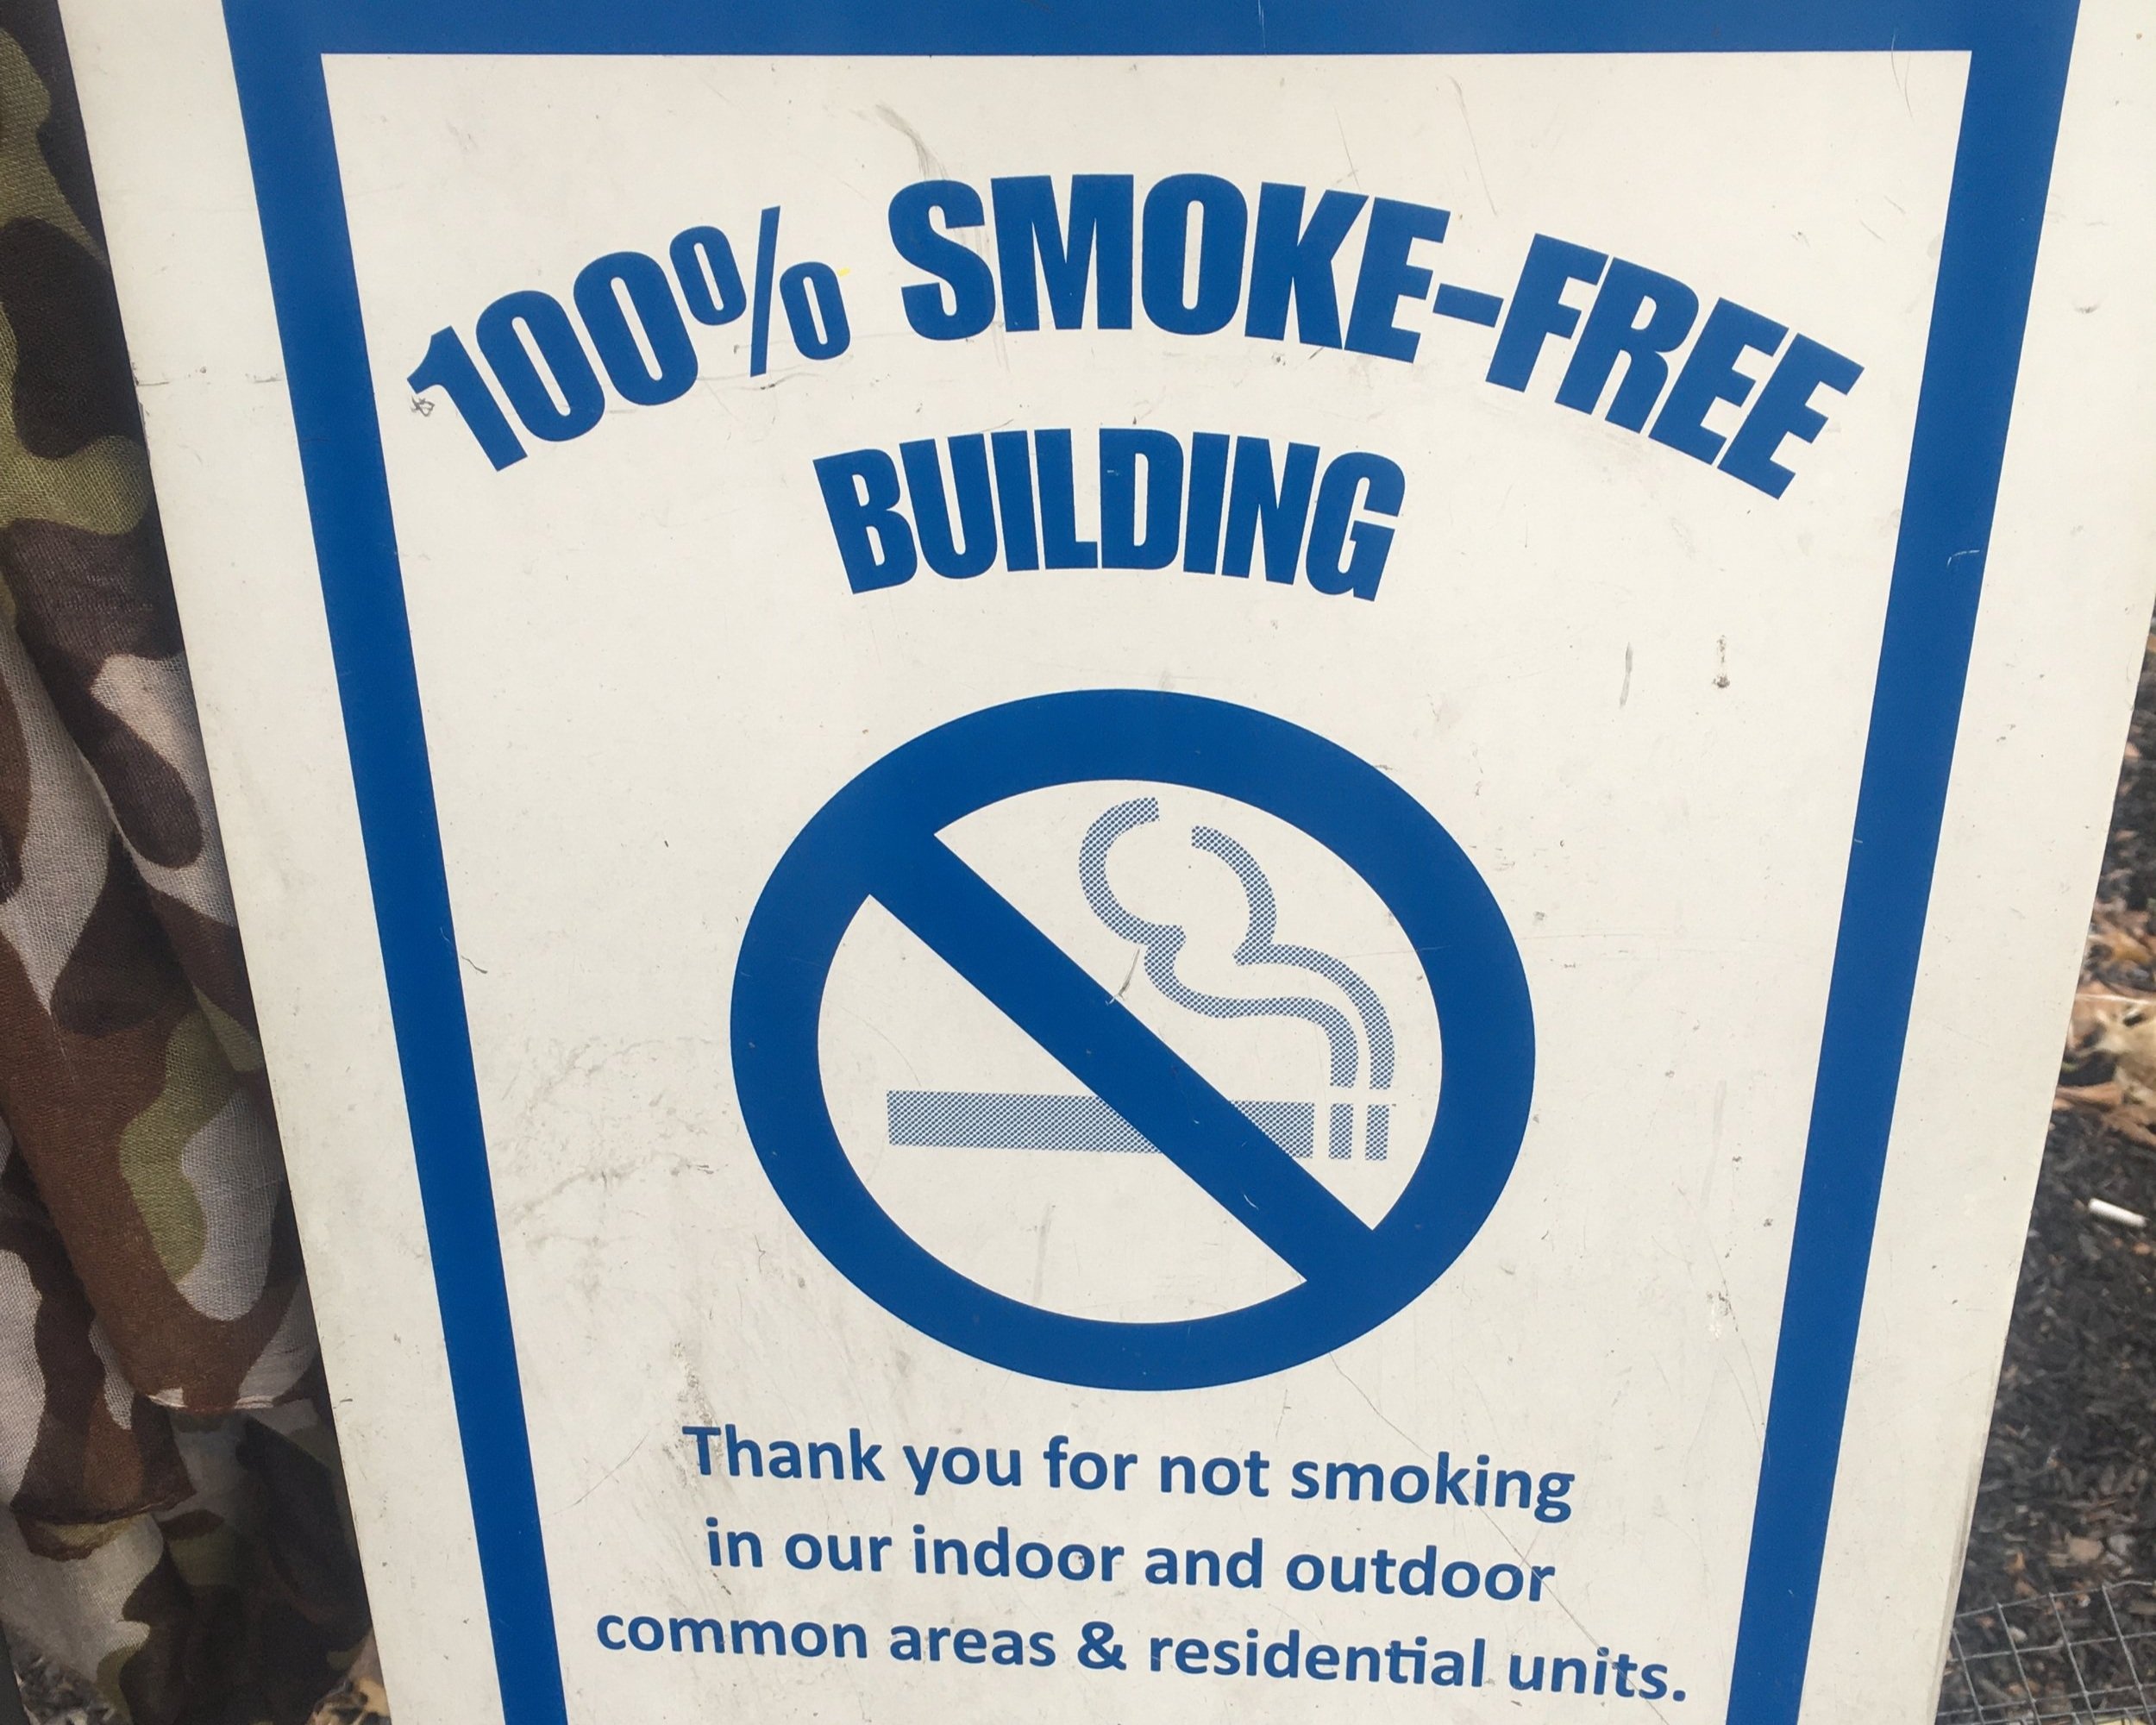   On 99th Street Carver Houses building smoke free; butts outside  